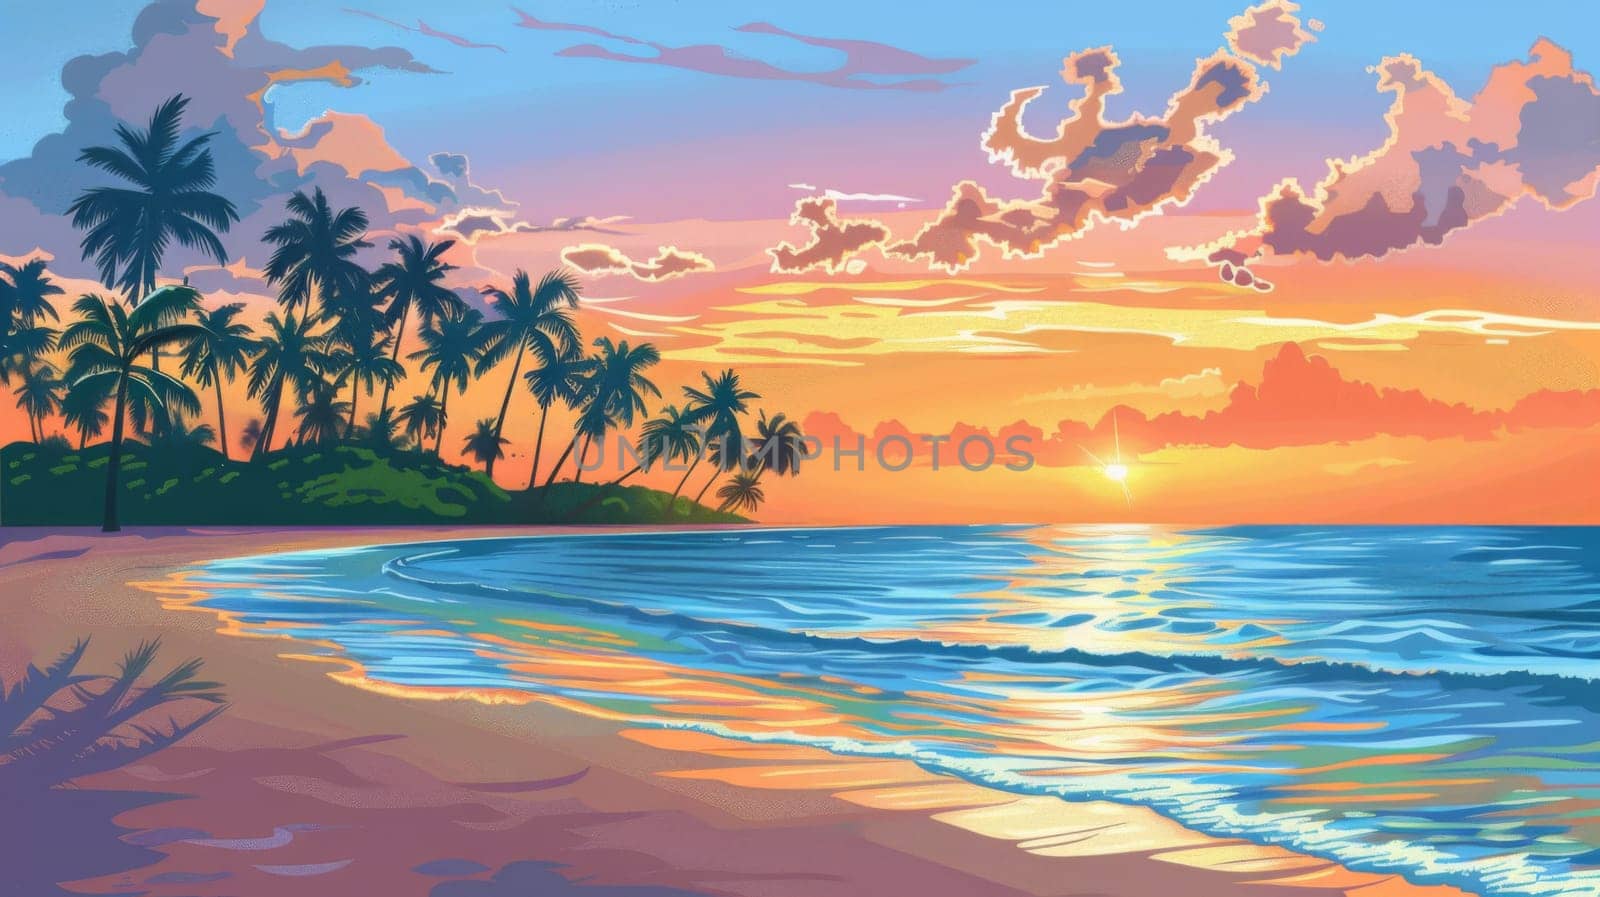 A painting of a sunset on the beach with palm trees